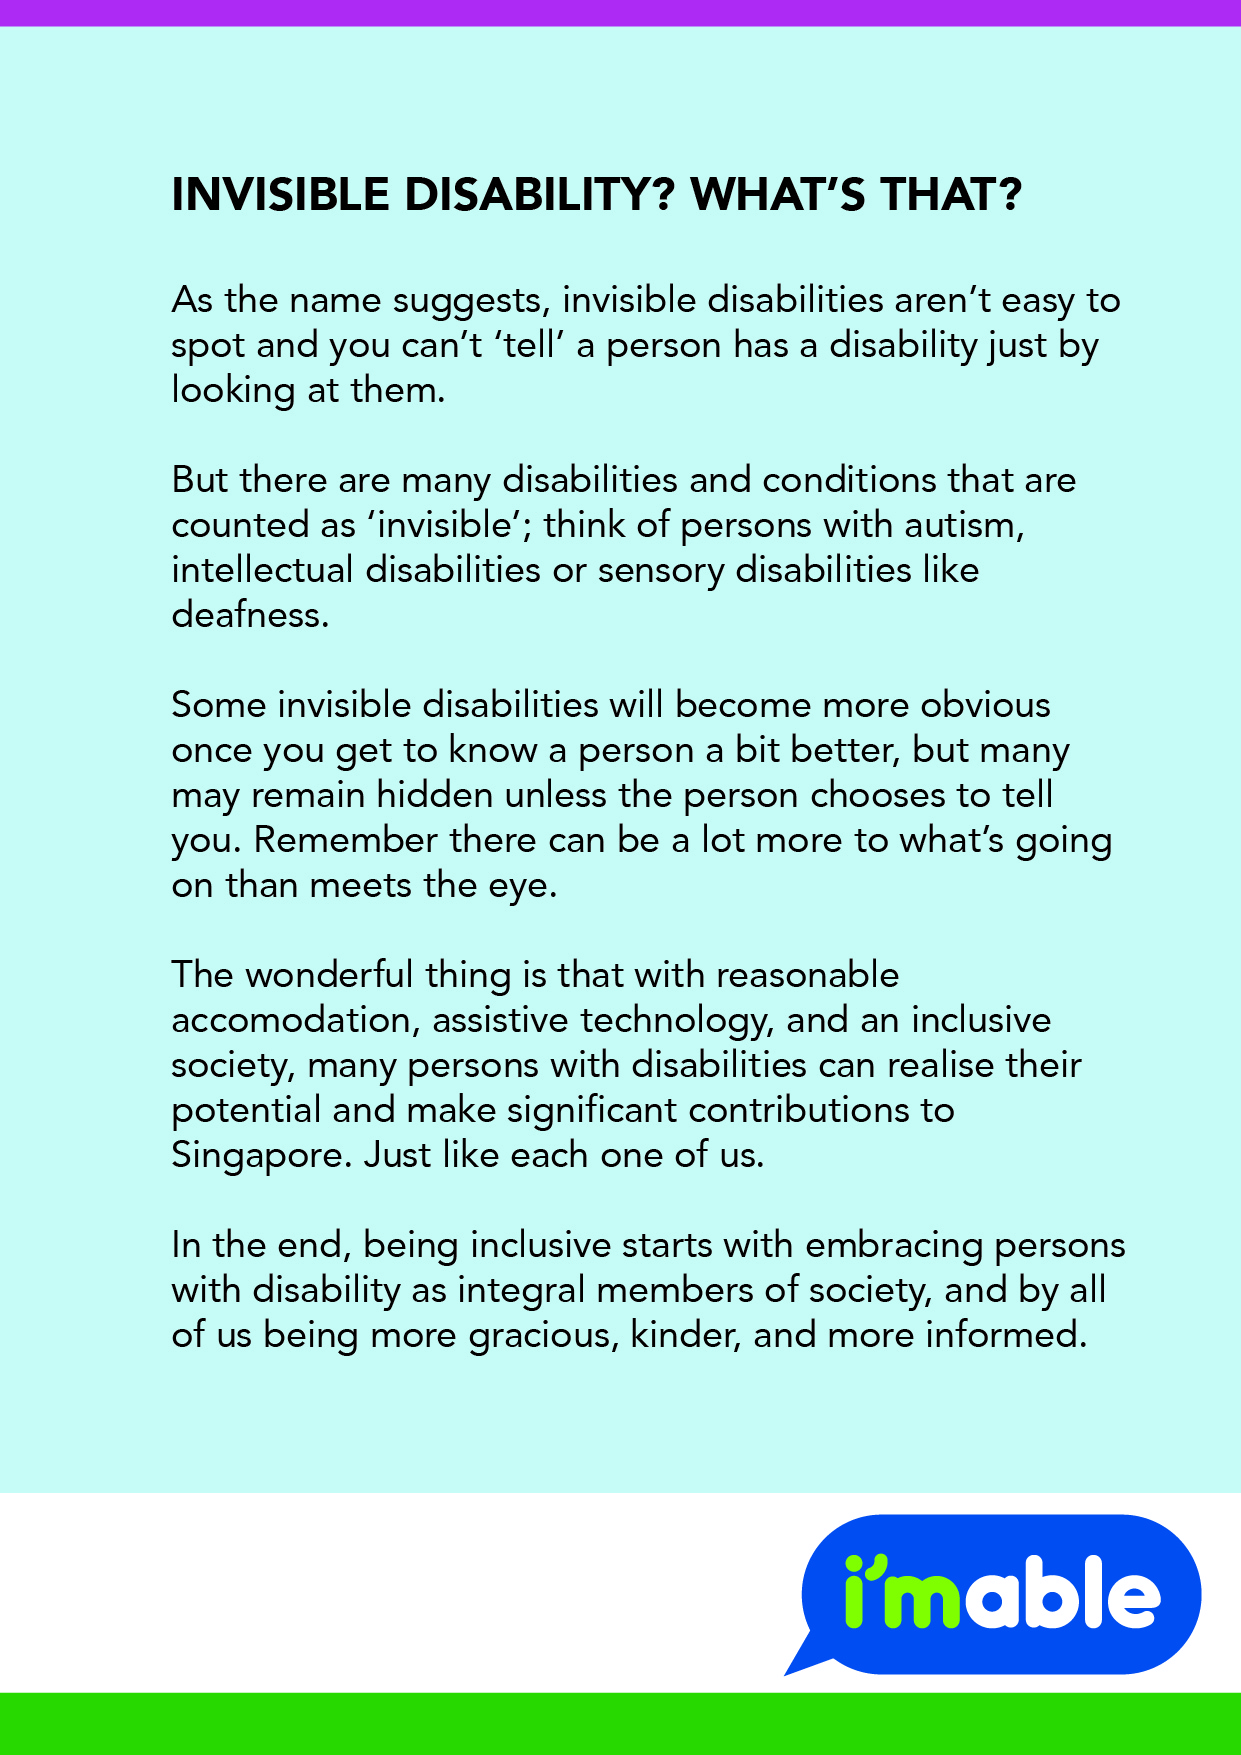 Explanation on how disability can be invisible.